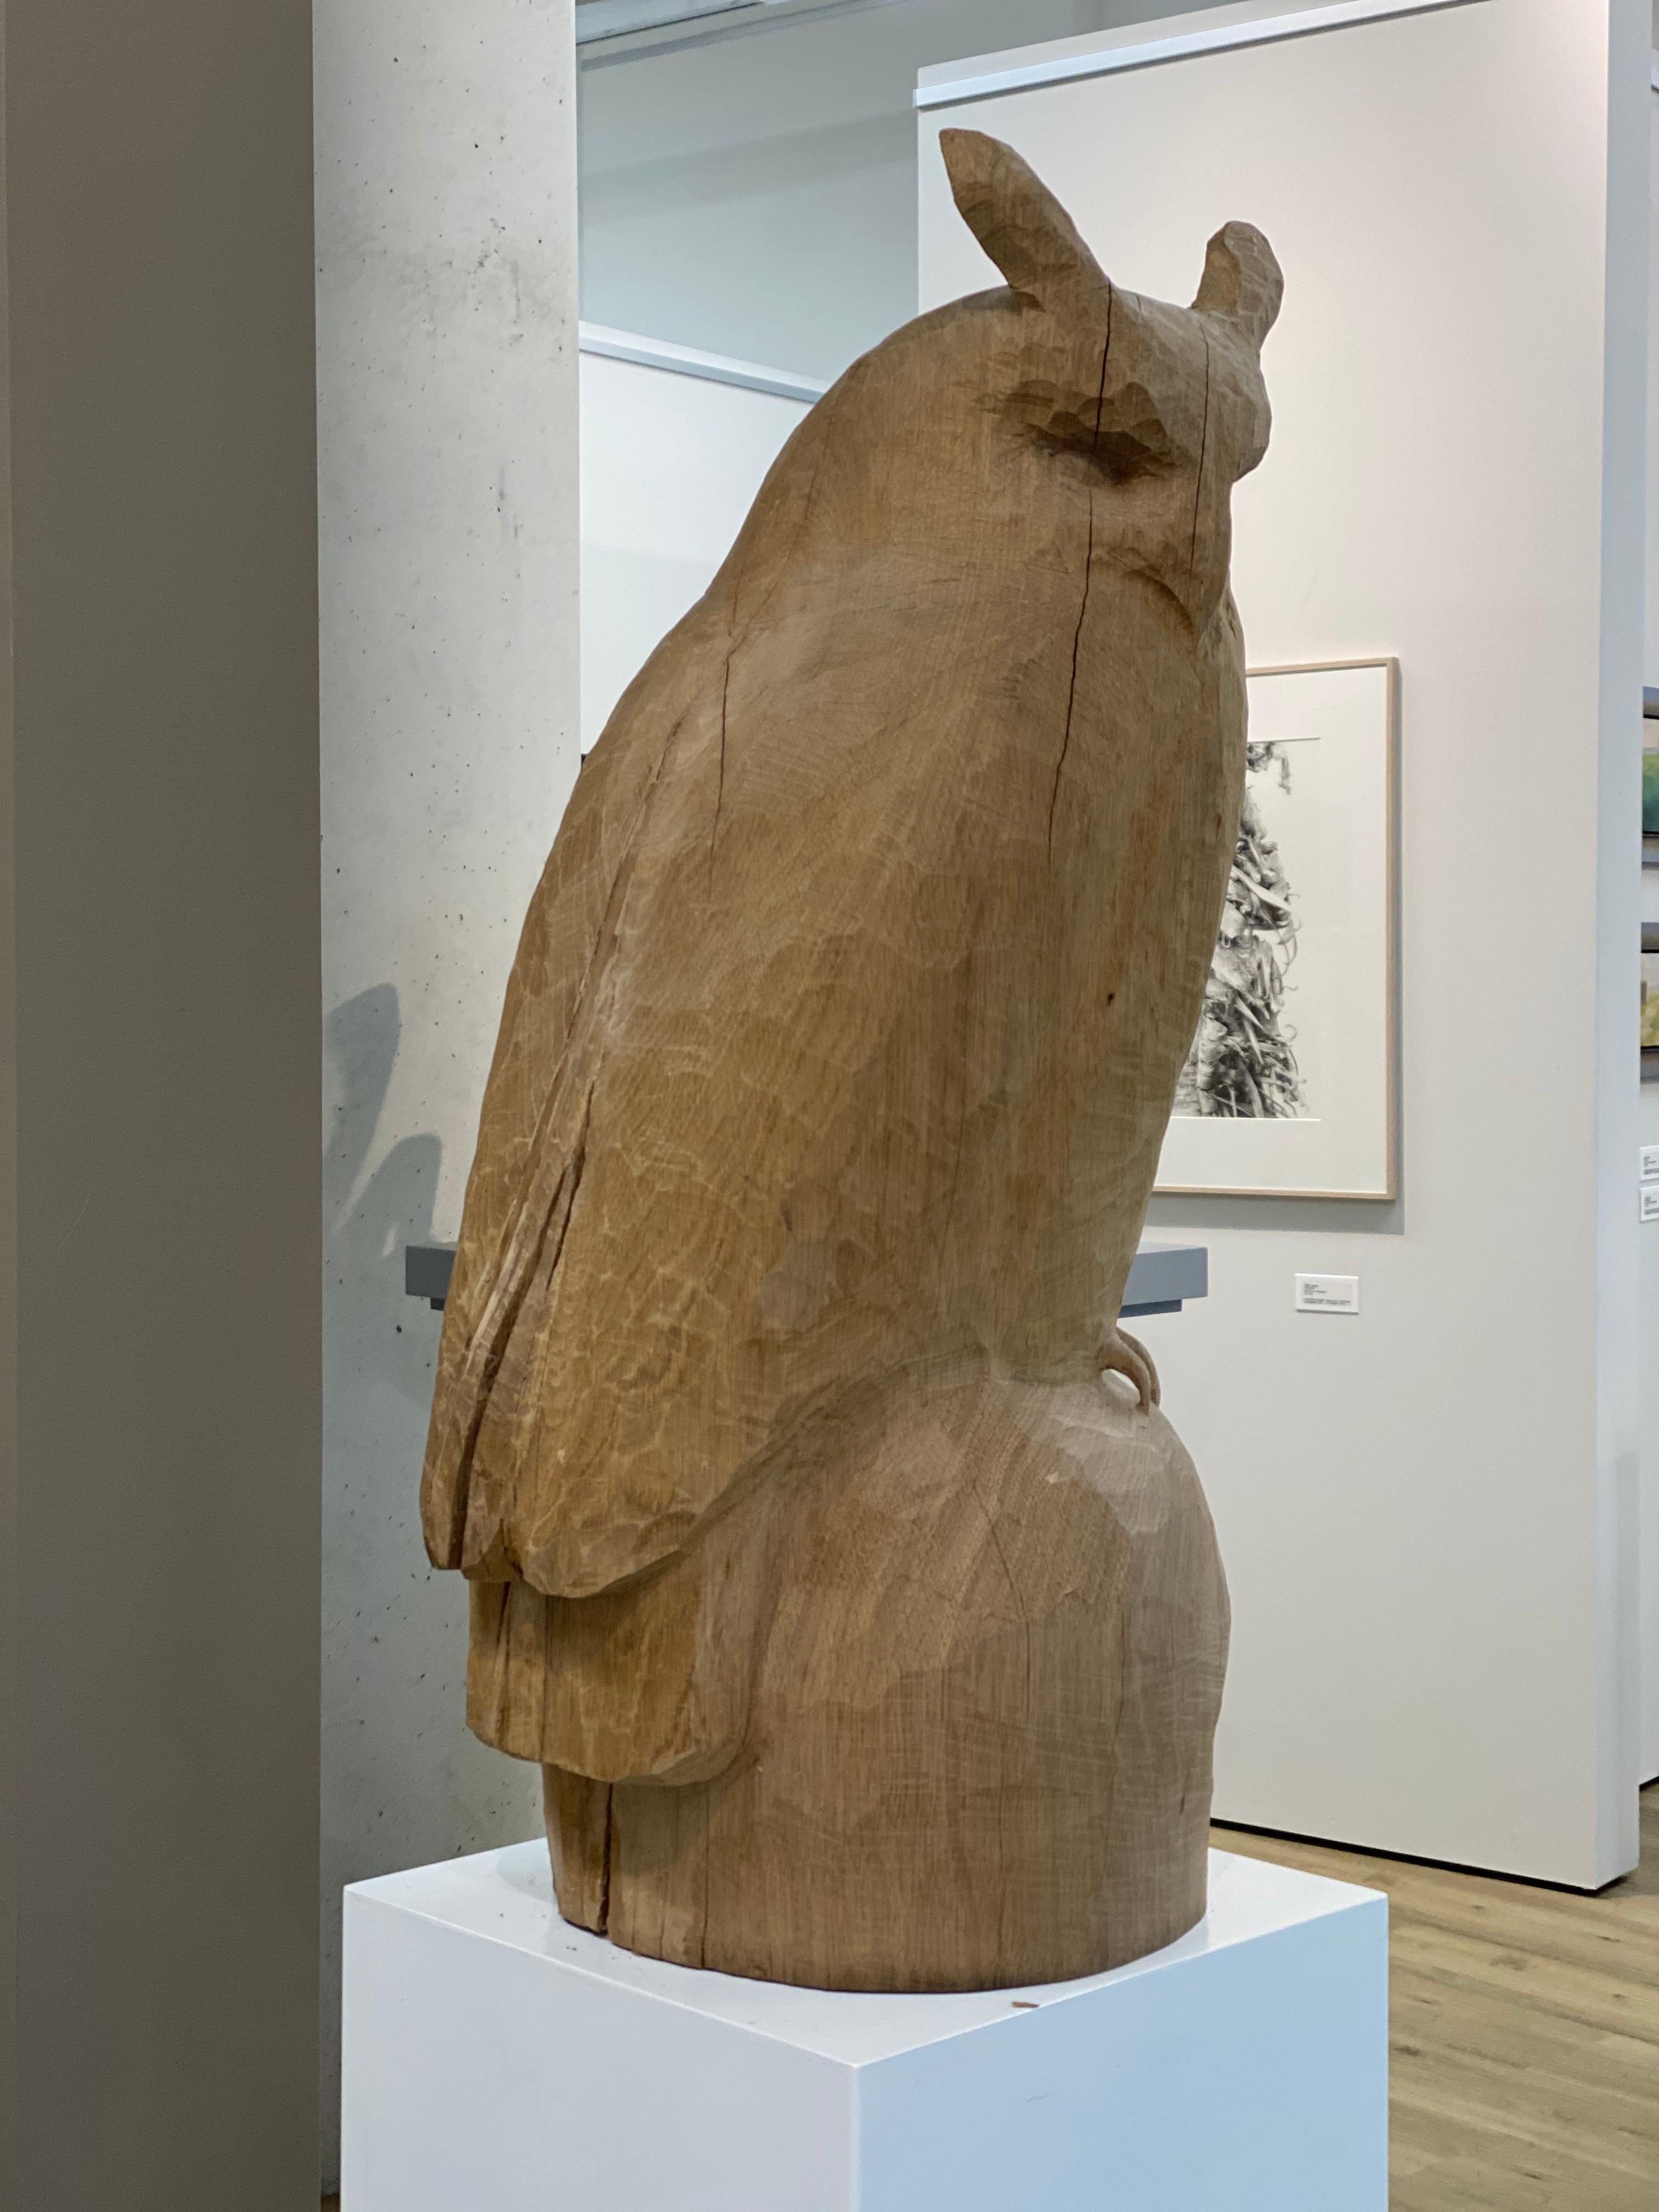 This owl is made from oak. The peace and power that both emanate from this monumental eagle owl is probably hidden in the actual format (lifelike) and the deep-set eye sockets. Beautiful and lifelike.

Jaap Deelder has exhibited at the Bonnard